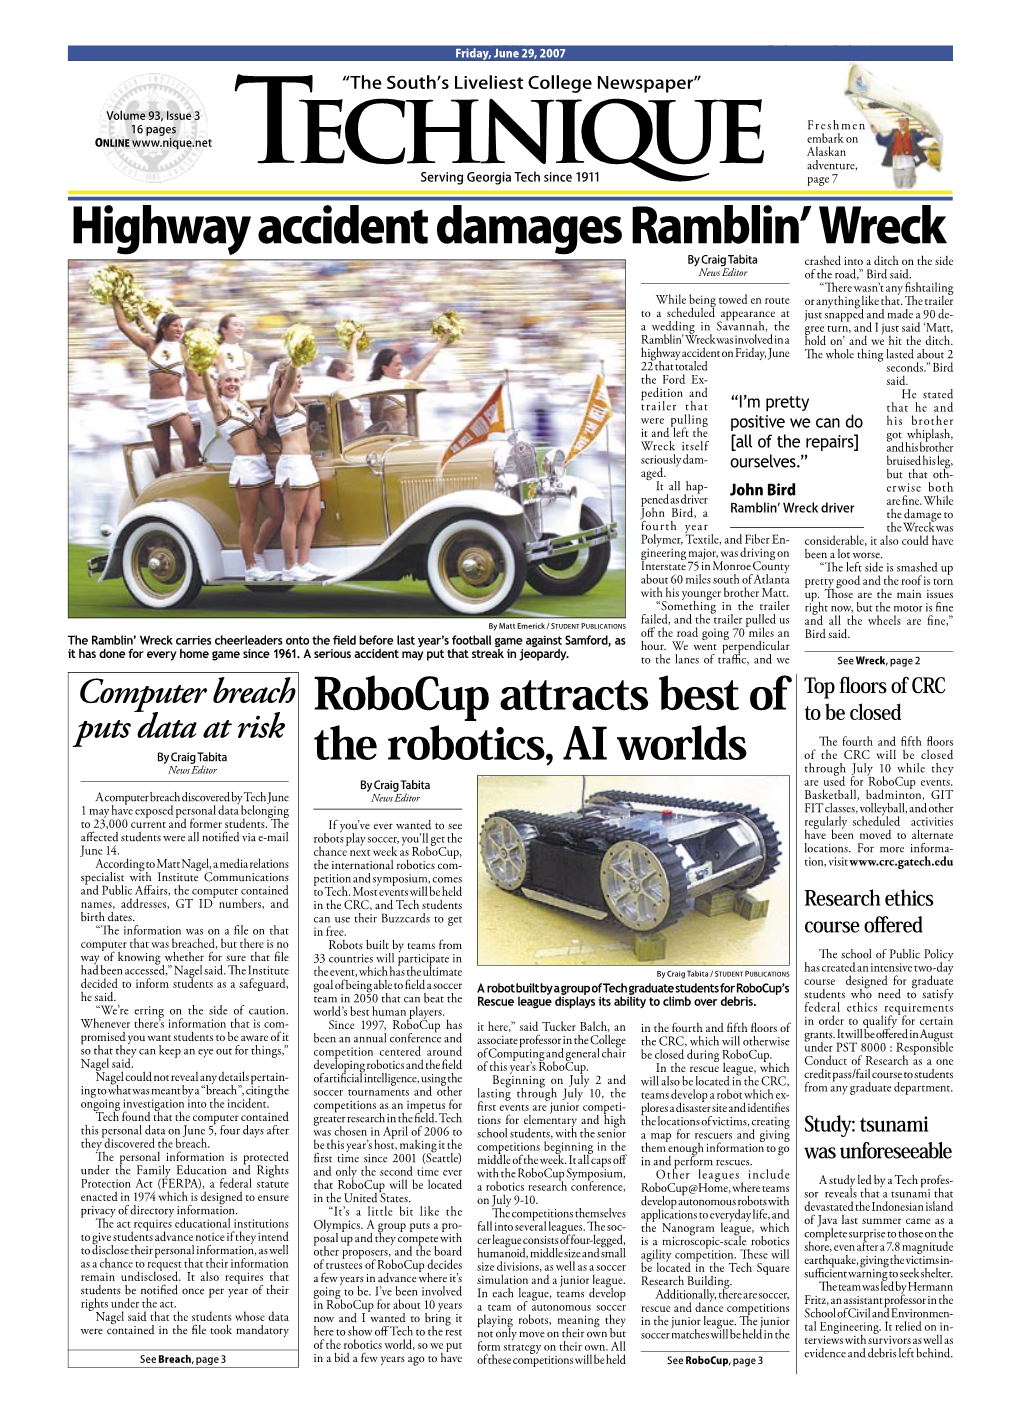 Highway Accident Damages Ramblin Wreck